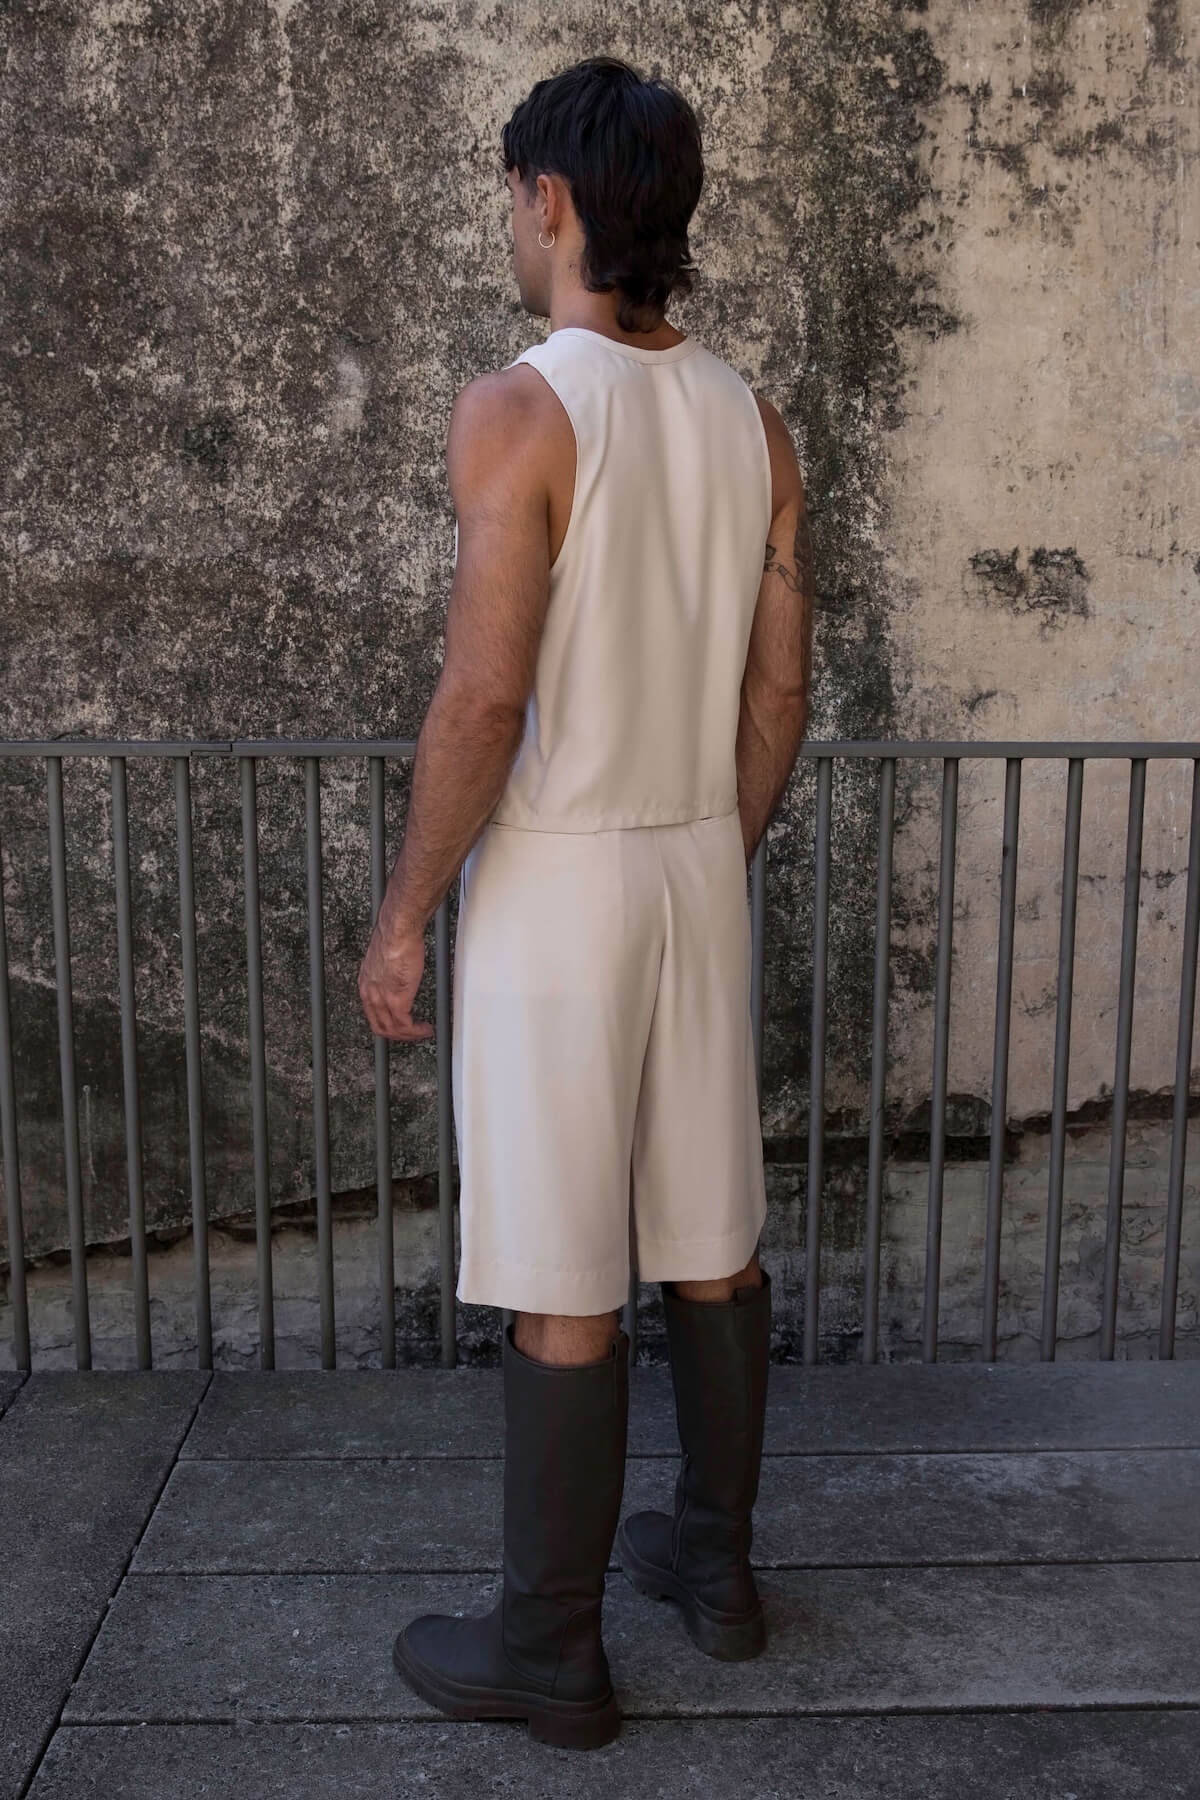 Men's knee length shorts and cropped tank for men